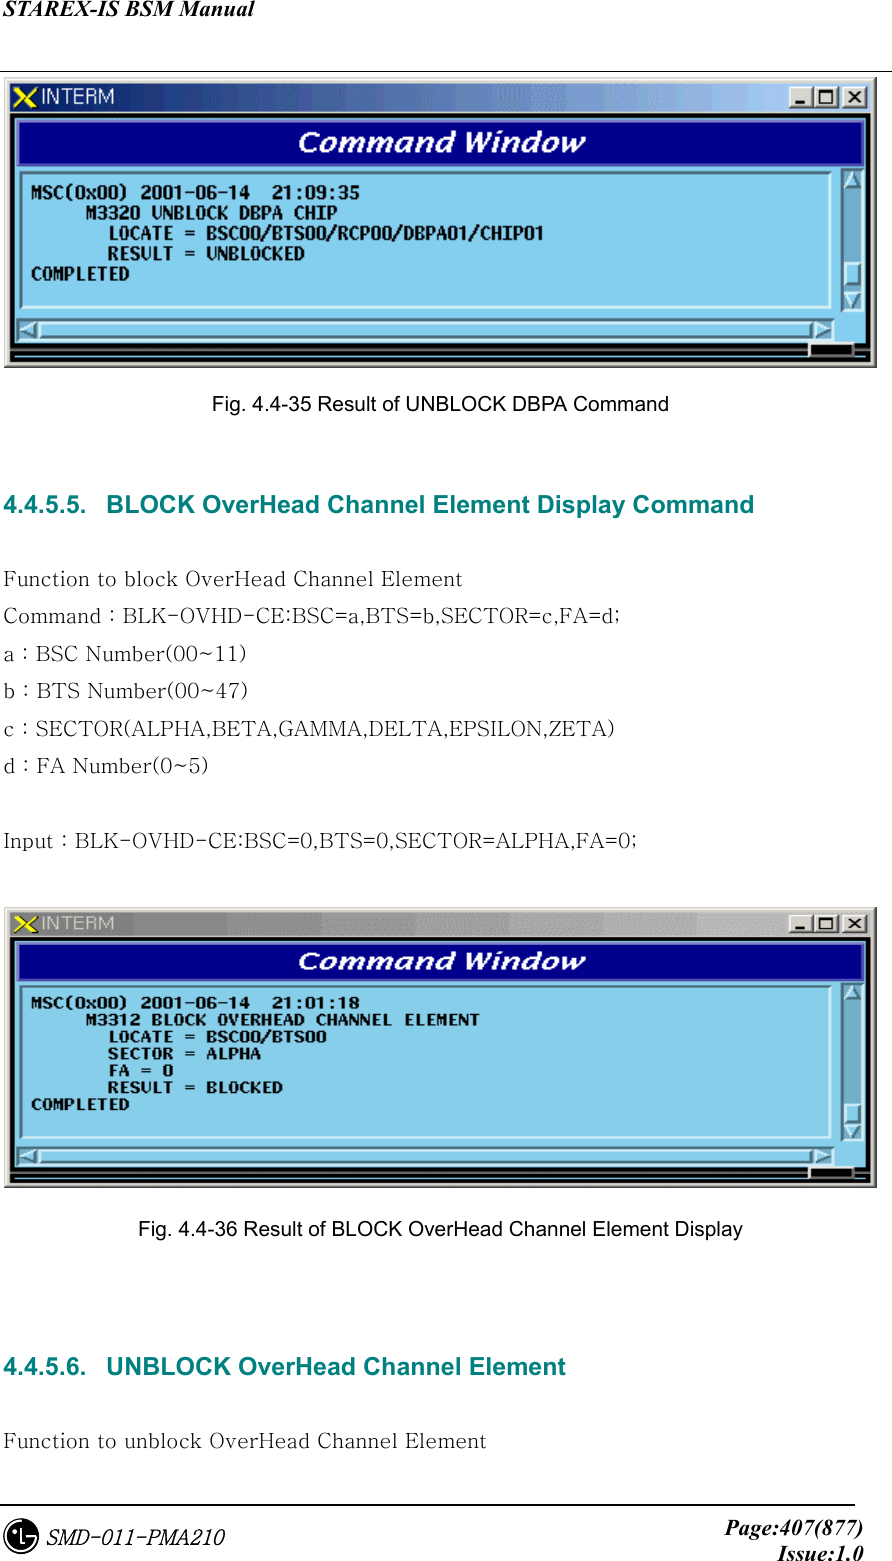 STAREX-IS BSM Manual     Page:407(877)Issue:1.0SMD-011-PMA210  Fig. 4.4-35 Result of UNBLOCK DBPA Command  4.4.5.5.   BLOCK OverHead Channel Element Display Command  Function to block OverHead Channel Element   Command : BLK-OVHD-CE:BSC=a,BTS=b,SECTOR=c,FA=d; a : BSC Number(00~11) b : BTS Number(00~47) c : SECTOR(ALPHA,BETA,GAMMA,DELTA,EPSILON,ZETA) d : FA Number(0~5)  Input : BLK-OVHD-CE:BSC=0,BTS=0,SECTOR=ALPHA,FA=0;   Fig. 4.4-36 Result of BLOCK OverHead Channel Element Display   4.4.5.6.   UNBLOCK OverHead Channel Element  Function to unblock OverHead Channel Element 